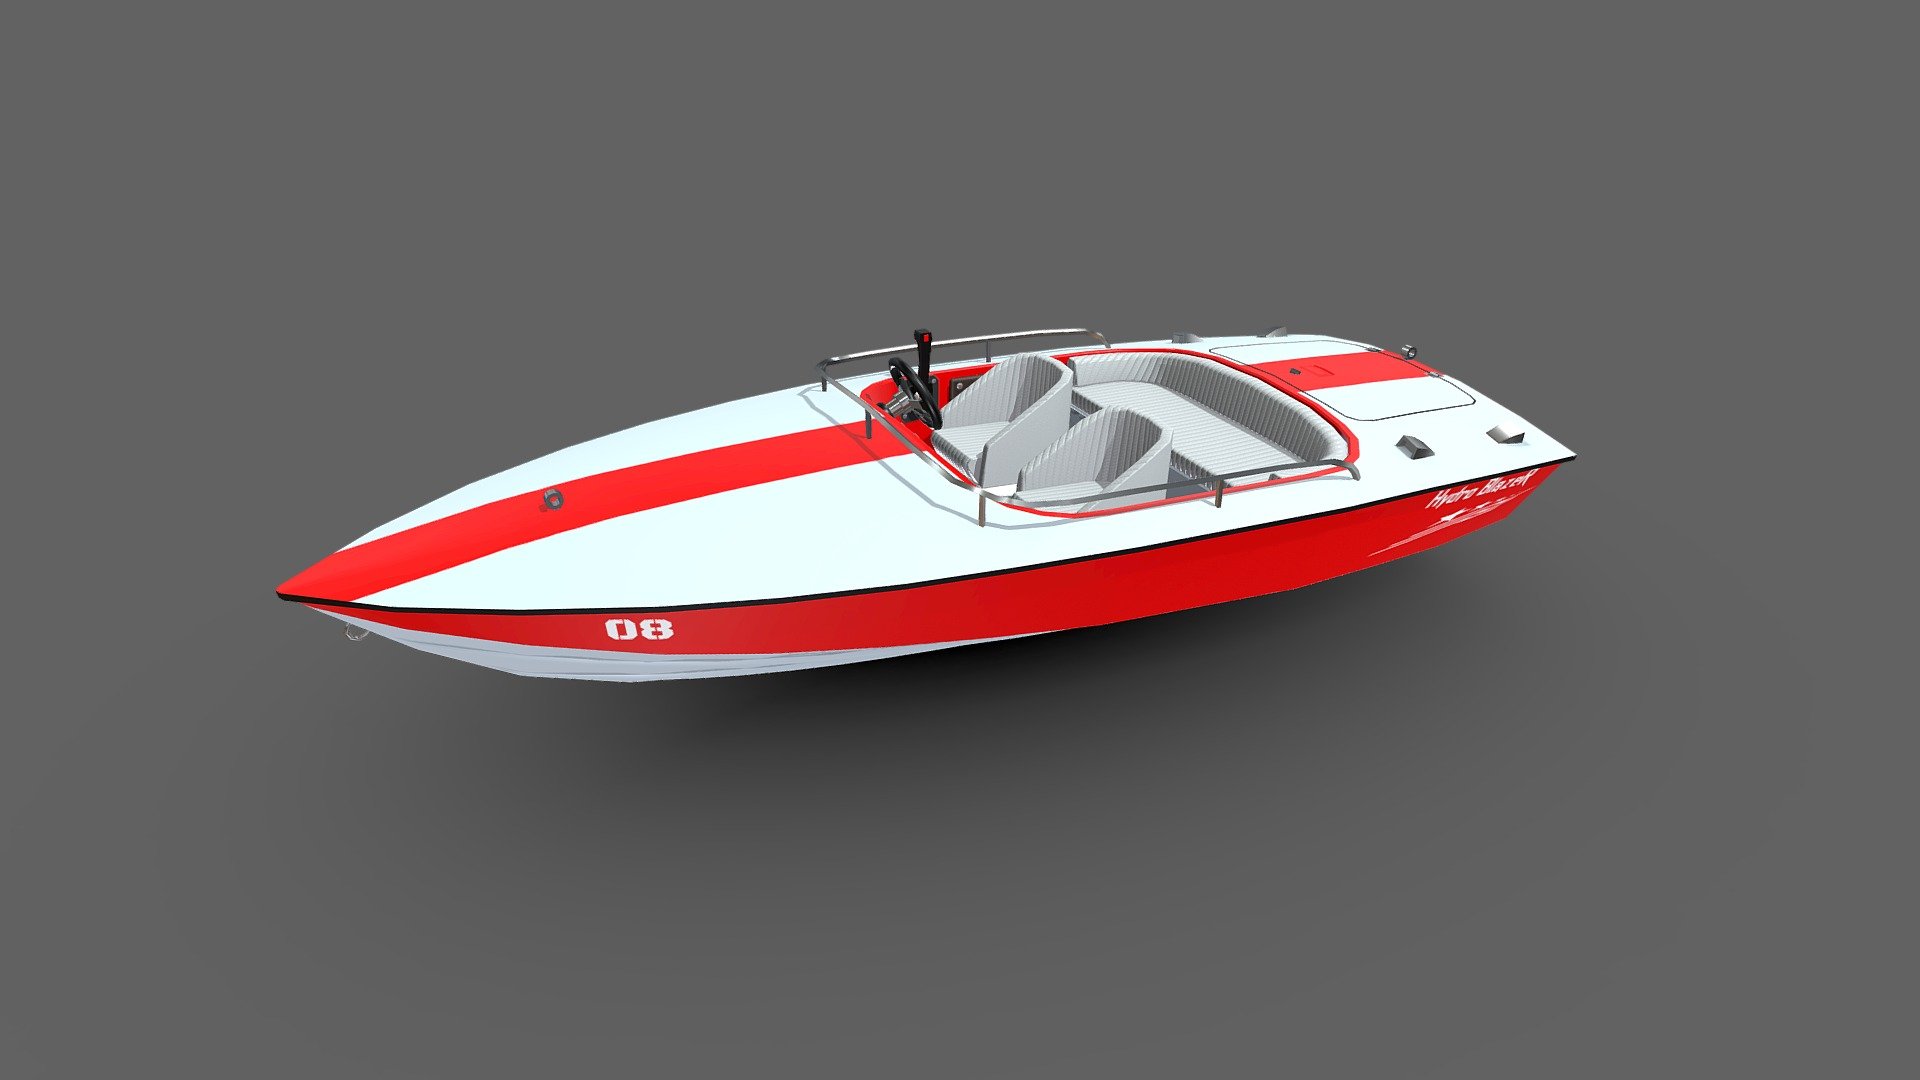 Speedboat




Low-poly ready to use in Games AR/VR ( 4500 tris)

Textures are in PNG format 4096x4096 PBR Metalness 1 set

Files unit: Centimeters

Available formats:MAX 2018 and 2015, OBJ, MTL, FBX

If you need any other file format you can always request it.

All formats include materials and textures.
 - Speedboat Low-poly - Buy Royalty Free 3D model by MaX3Dd 3d model